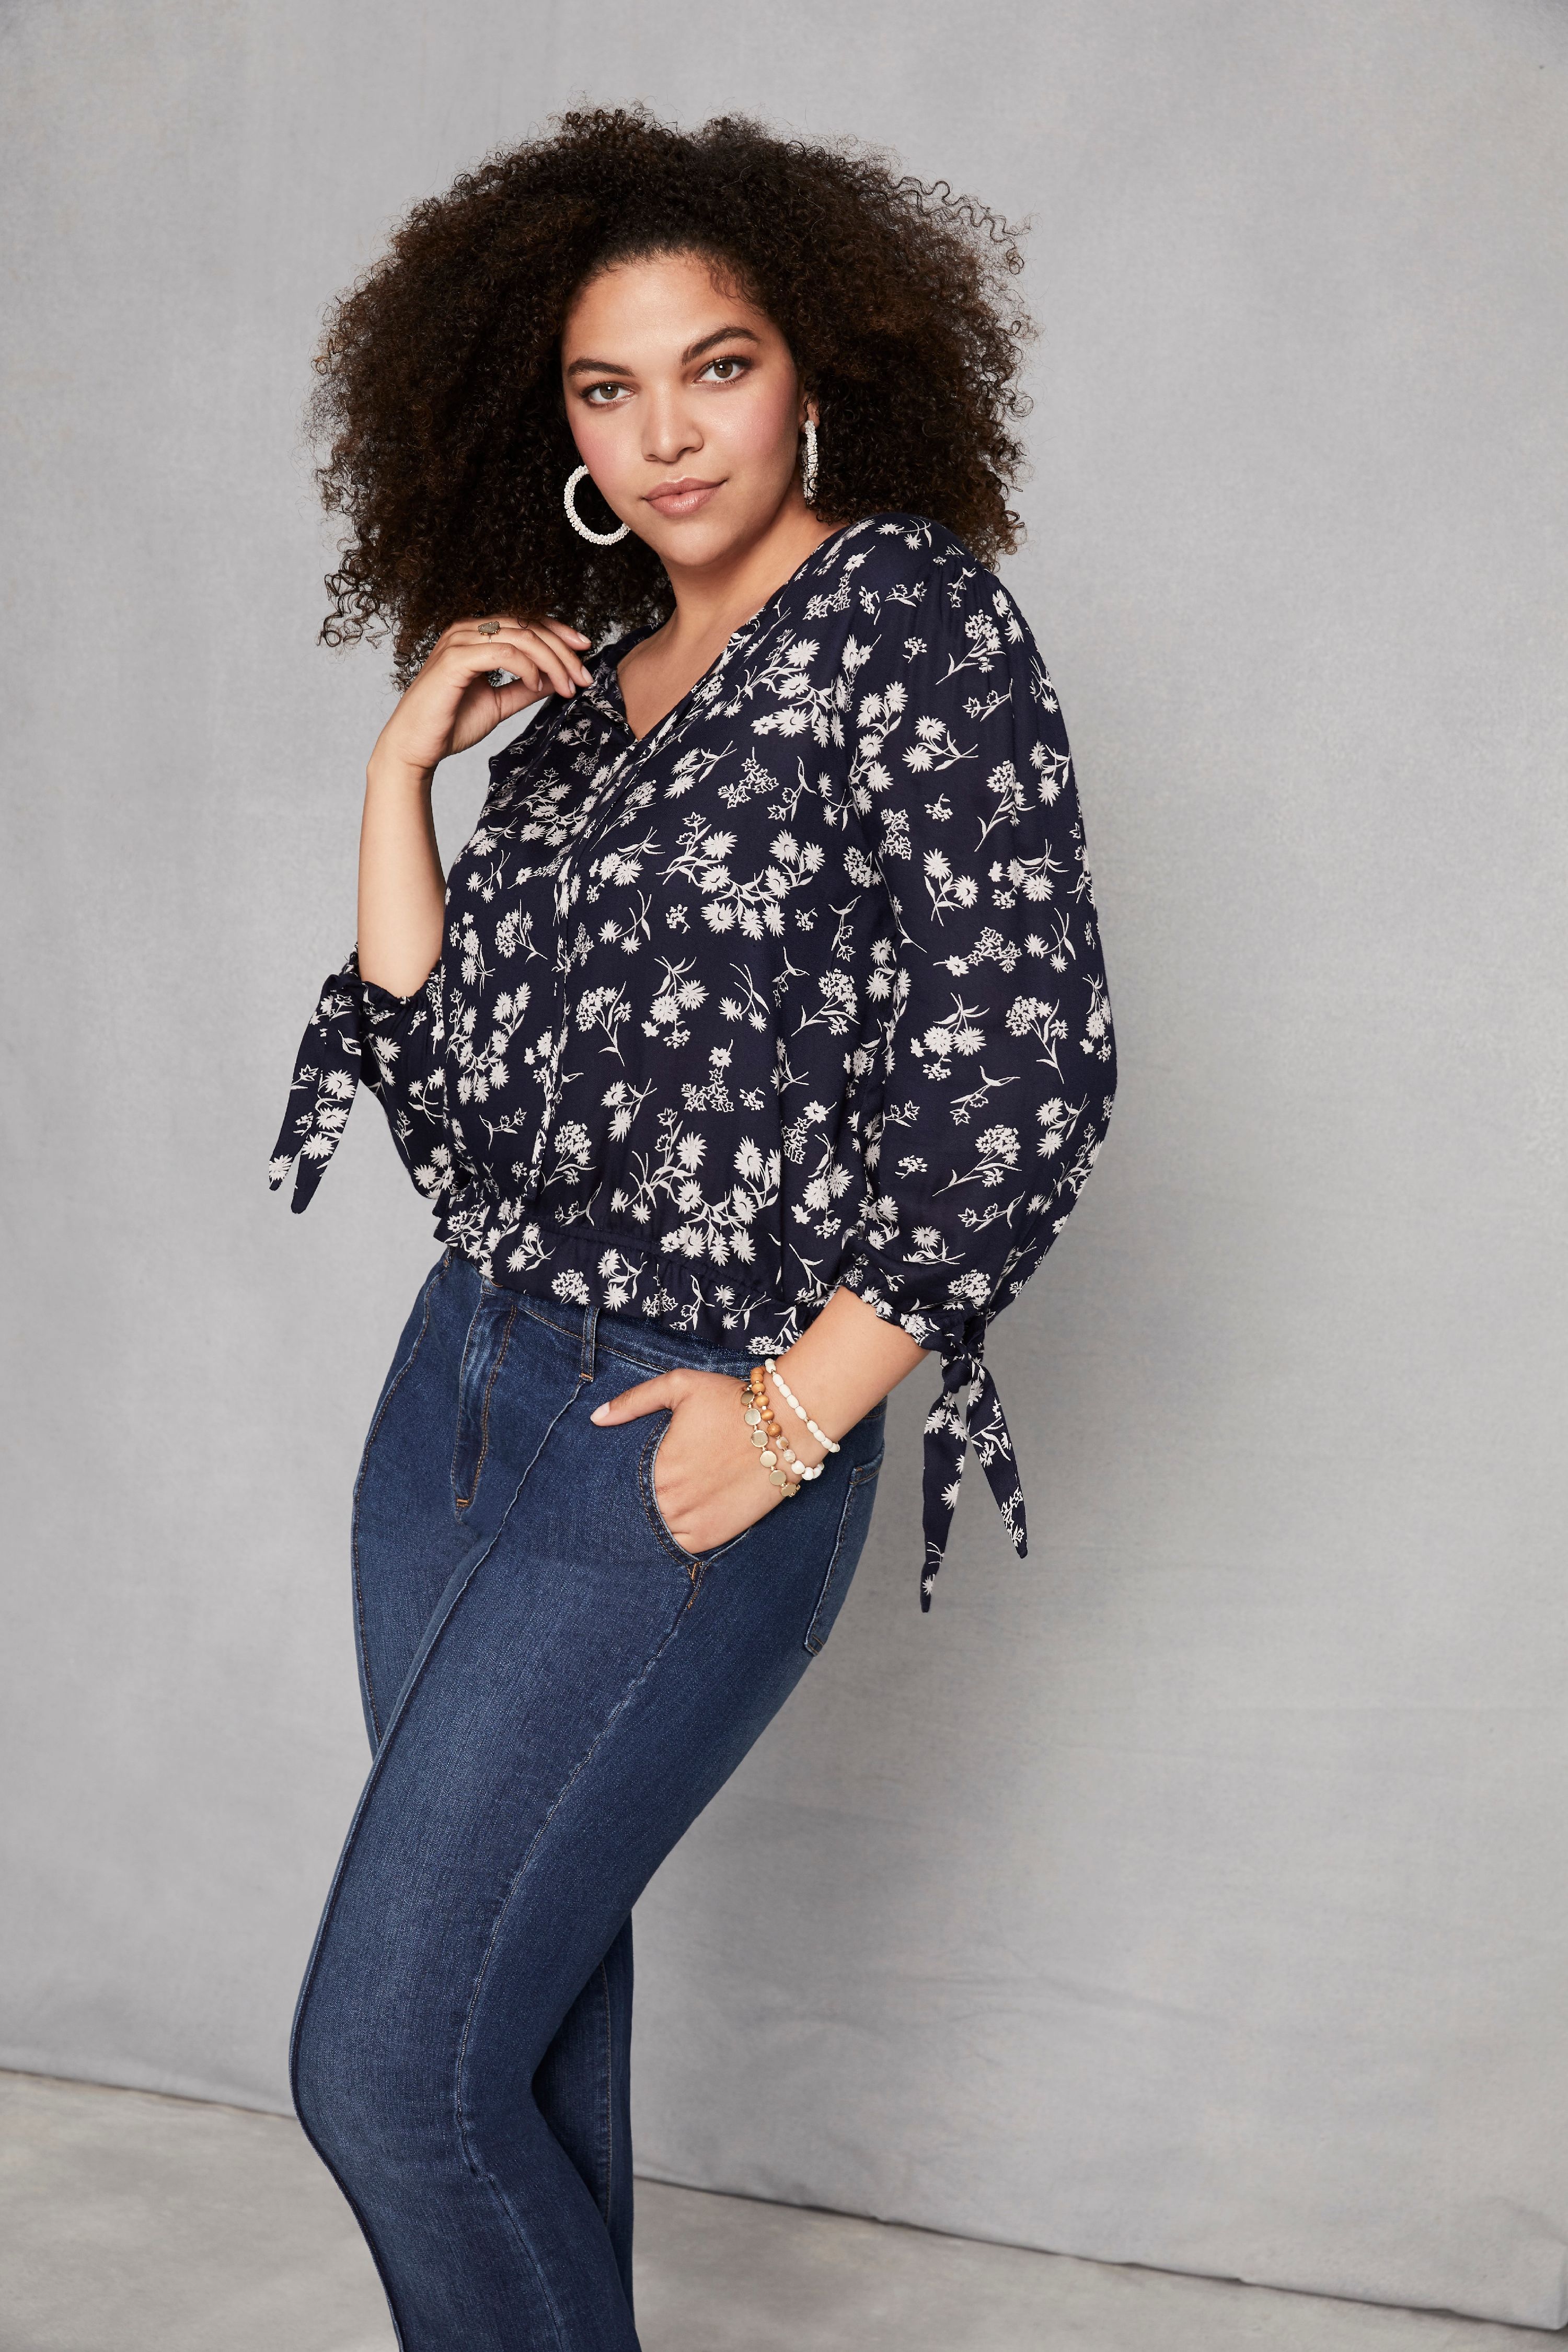 Sofia Jeans 3/4 Length Sleeve Woven Peasant Blouse Women's (Floral Print) - image 4 of 9